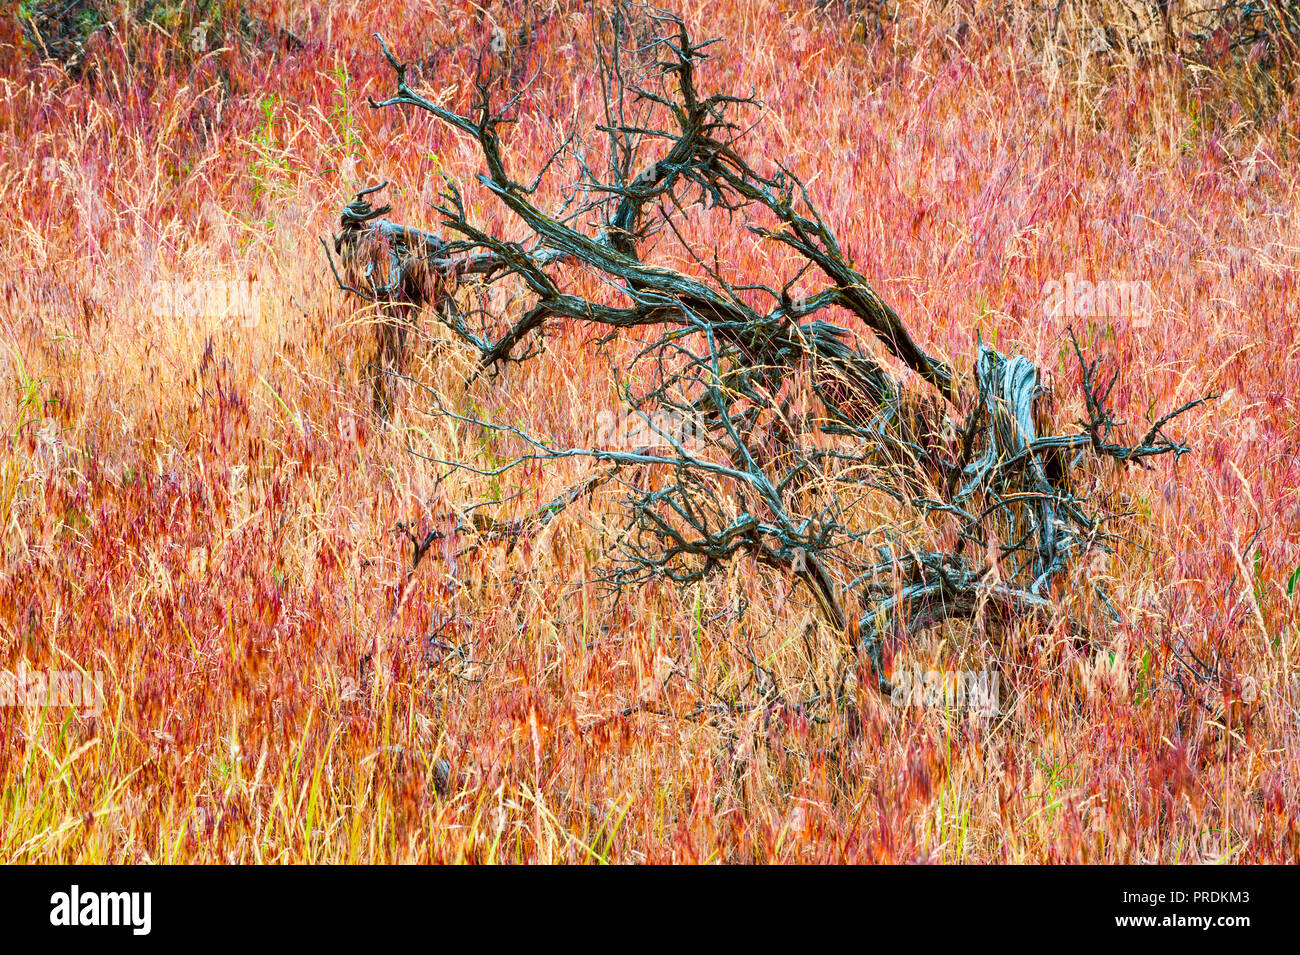 Close up of the natural vegetation one can see in the John Day Fossil Beds National Park in Oregon. Stock Photo